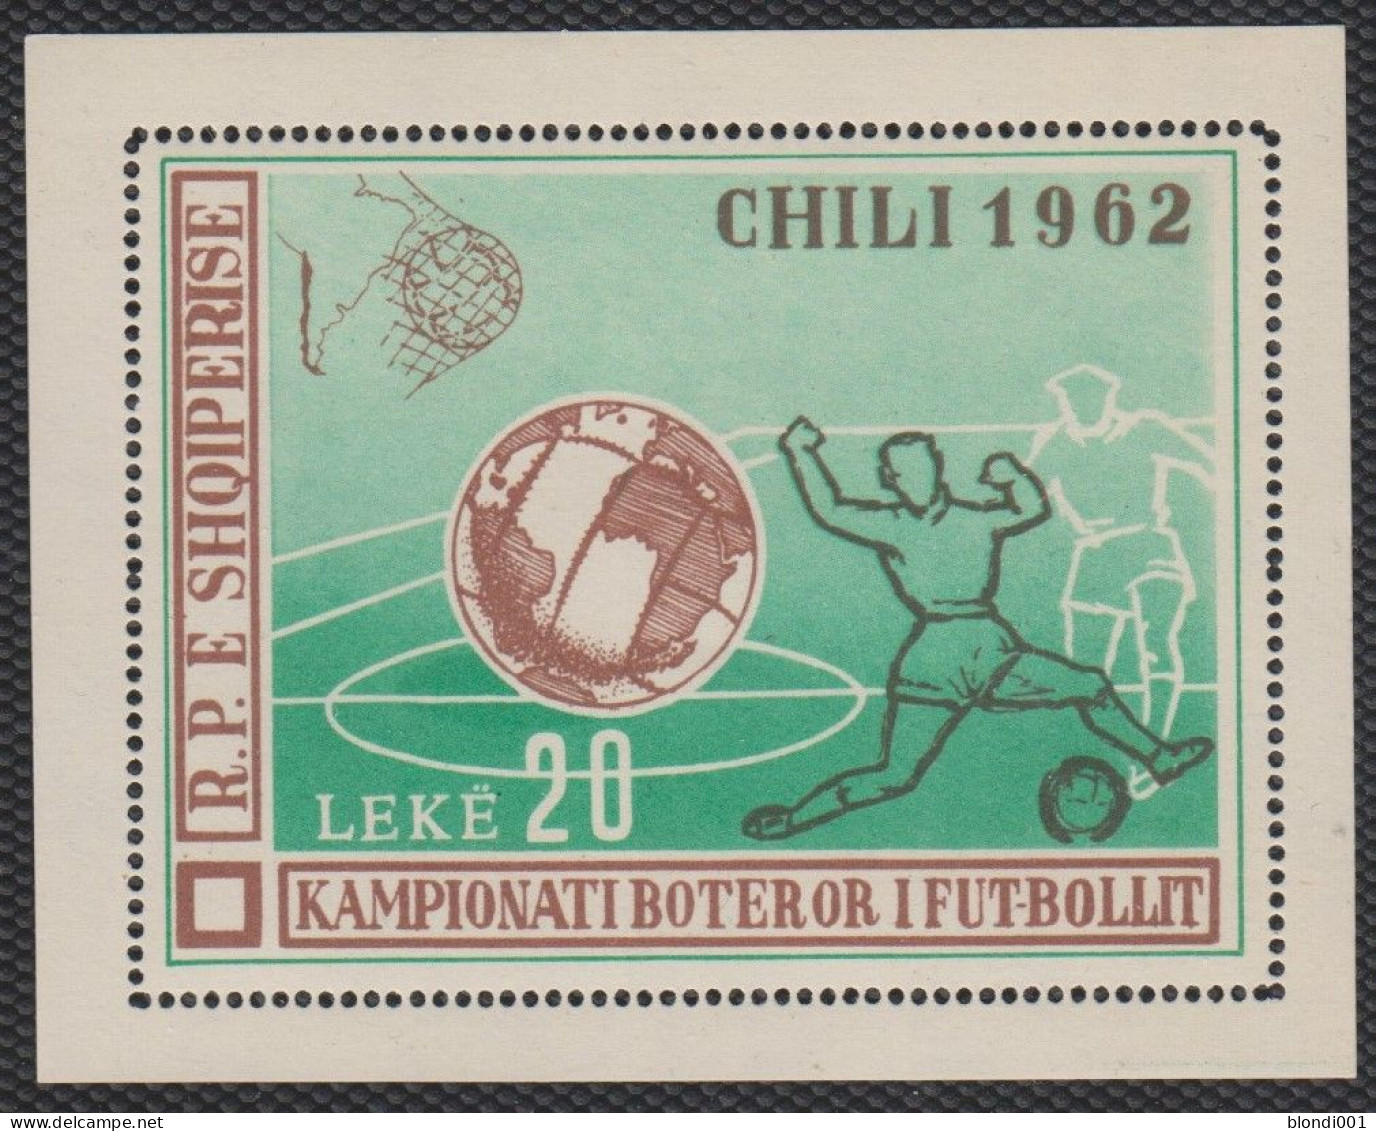 Soccer World Cup 1962 - Football - ALBANIA - S/S Perf. MNH - 1962 – Chile